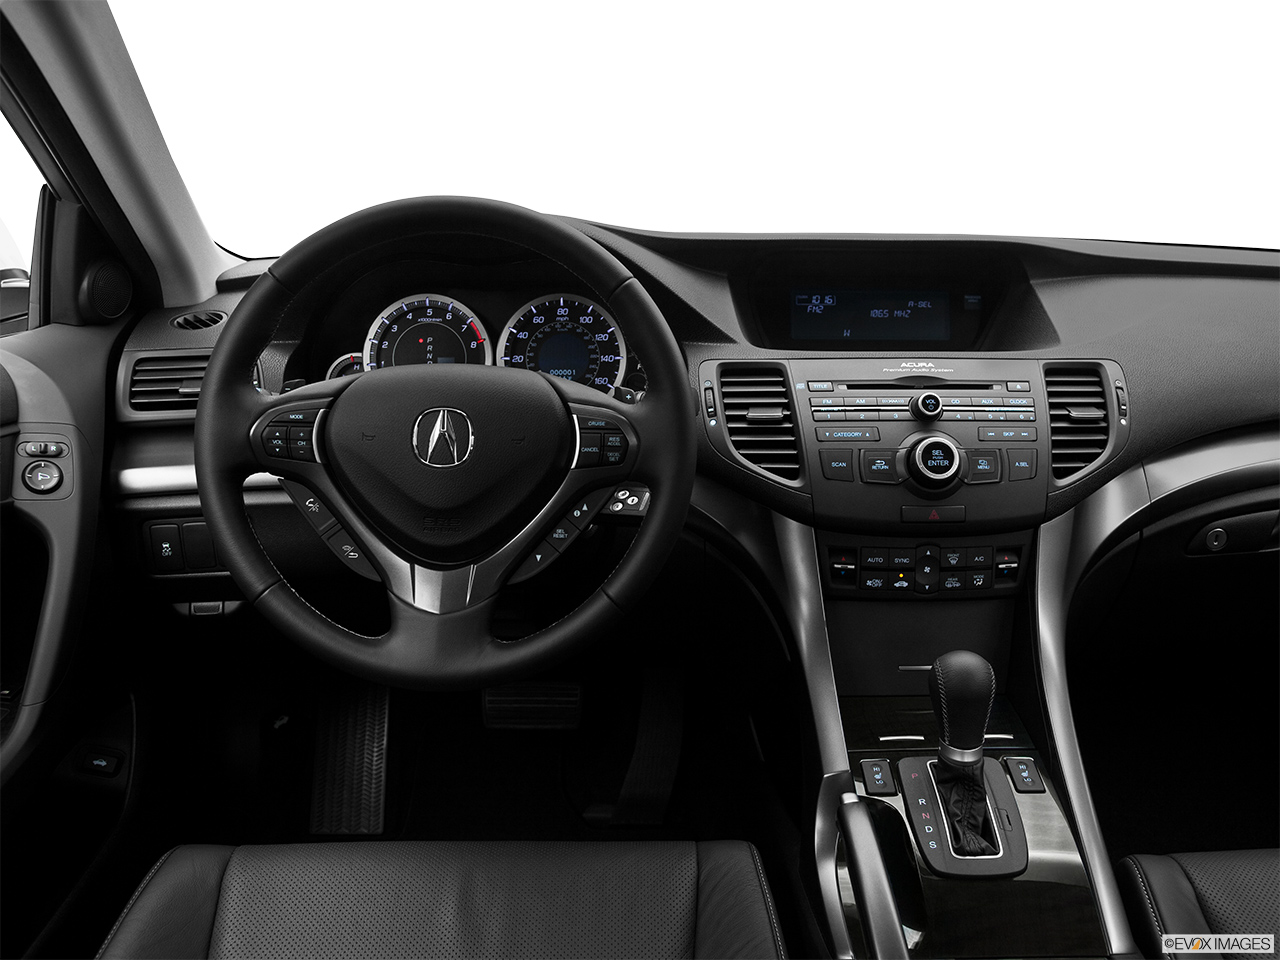 2011 Acura TSX TSX 5-speed Automatic Steering wheel/Center Console. 